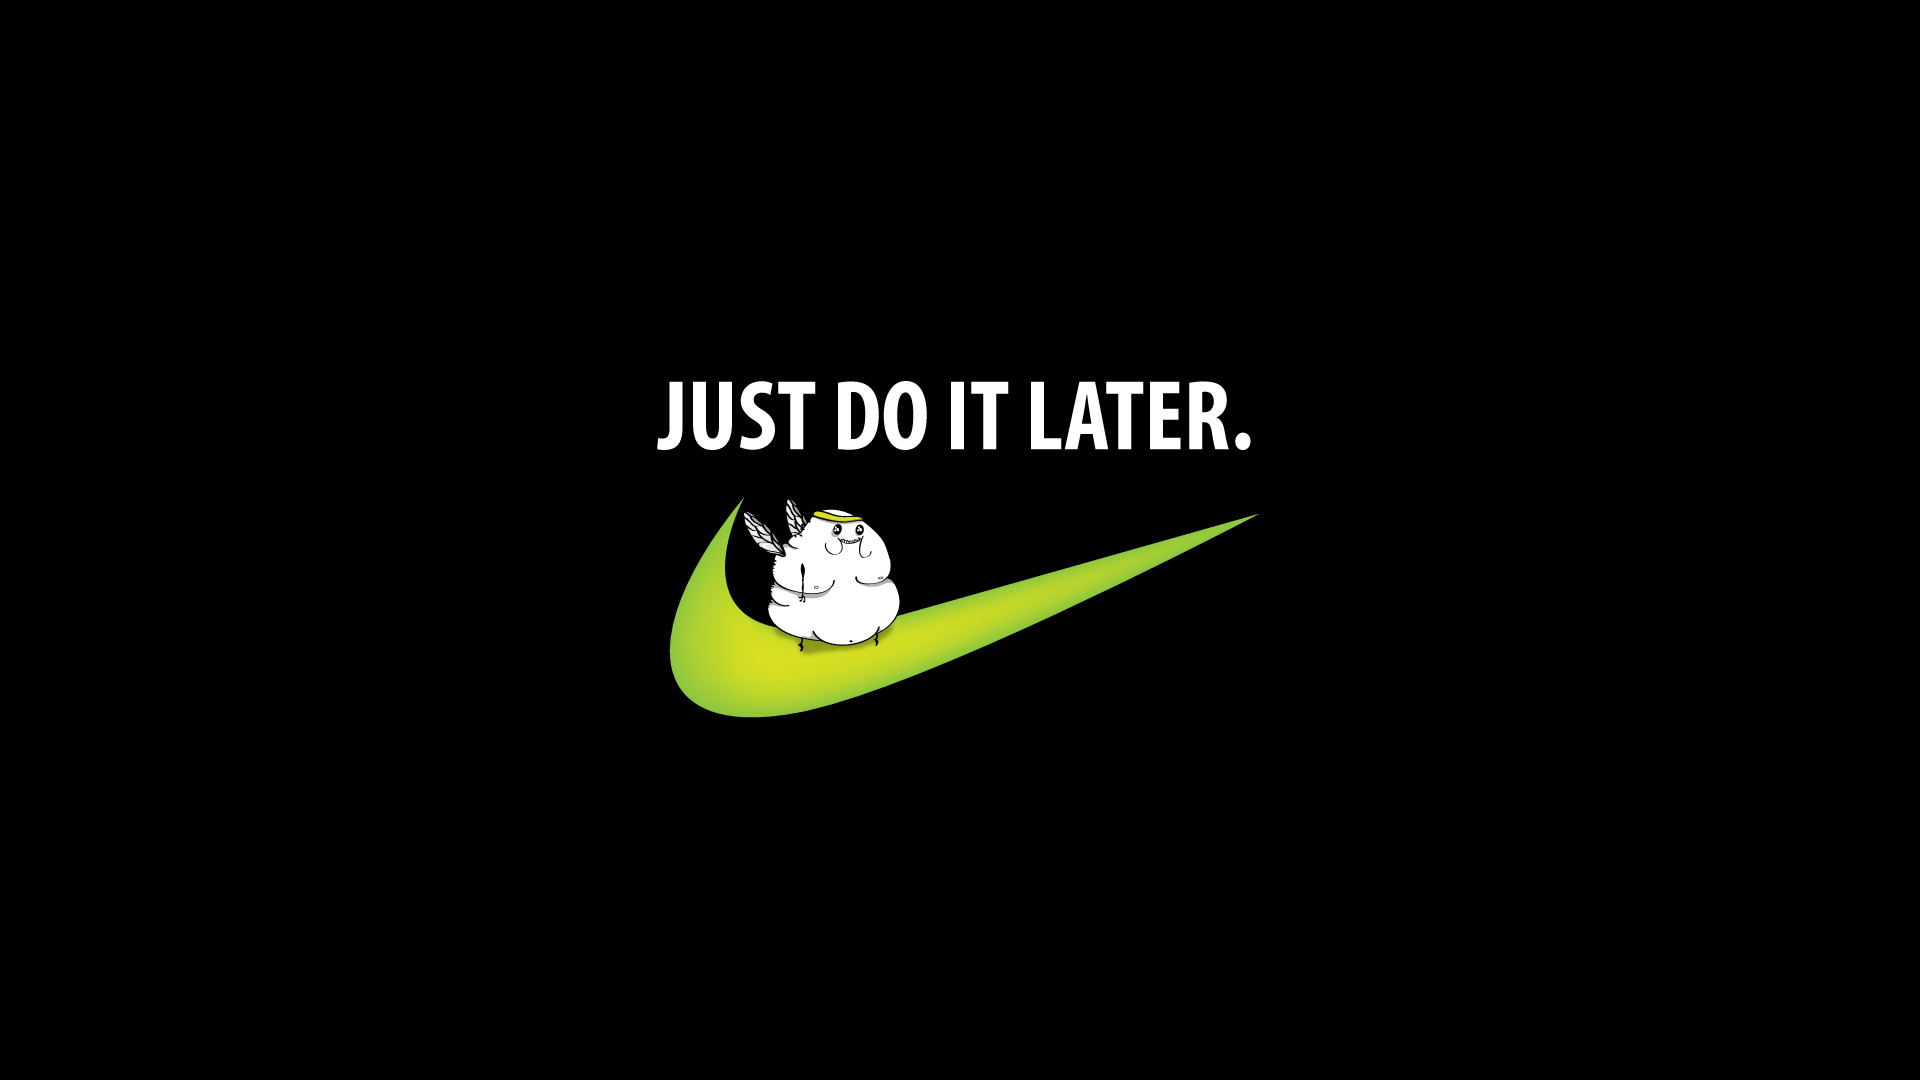 1920x1080 Nike Motivational Quotes Wallpaper Just do it later wallpaper,